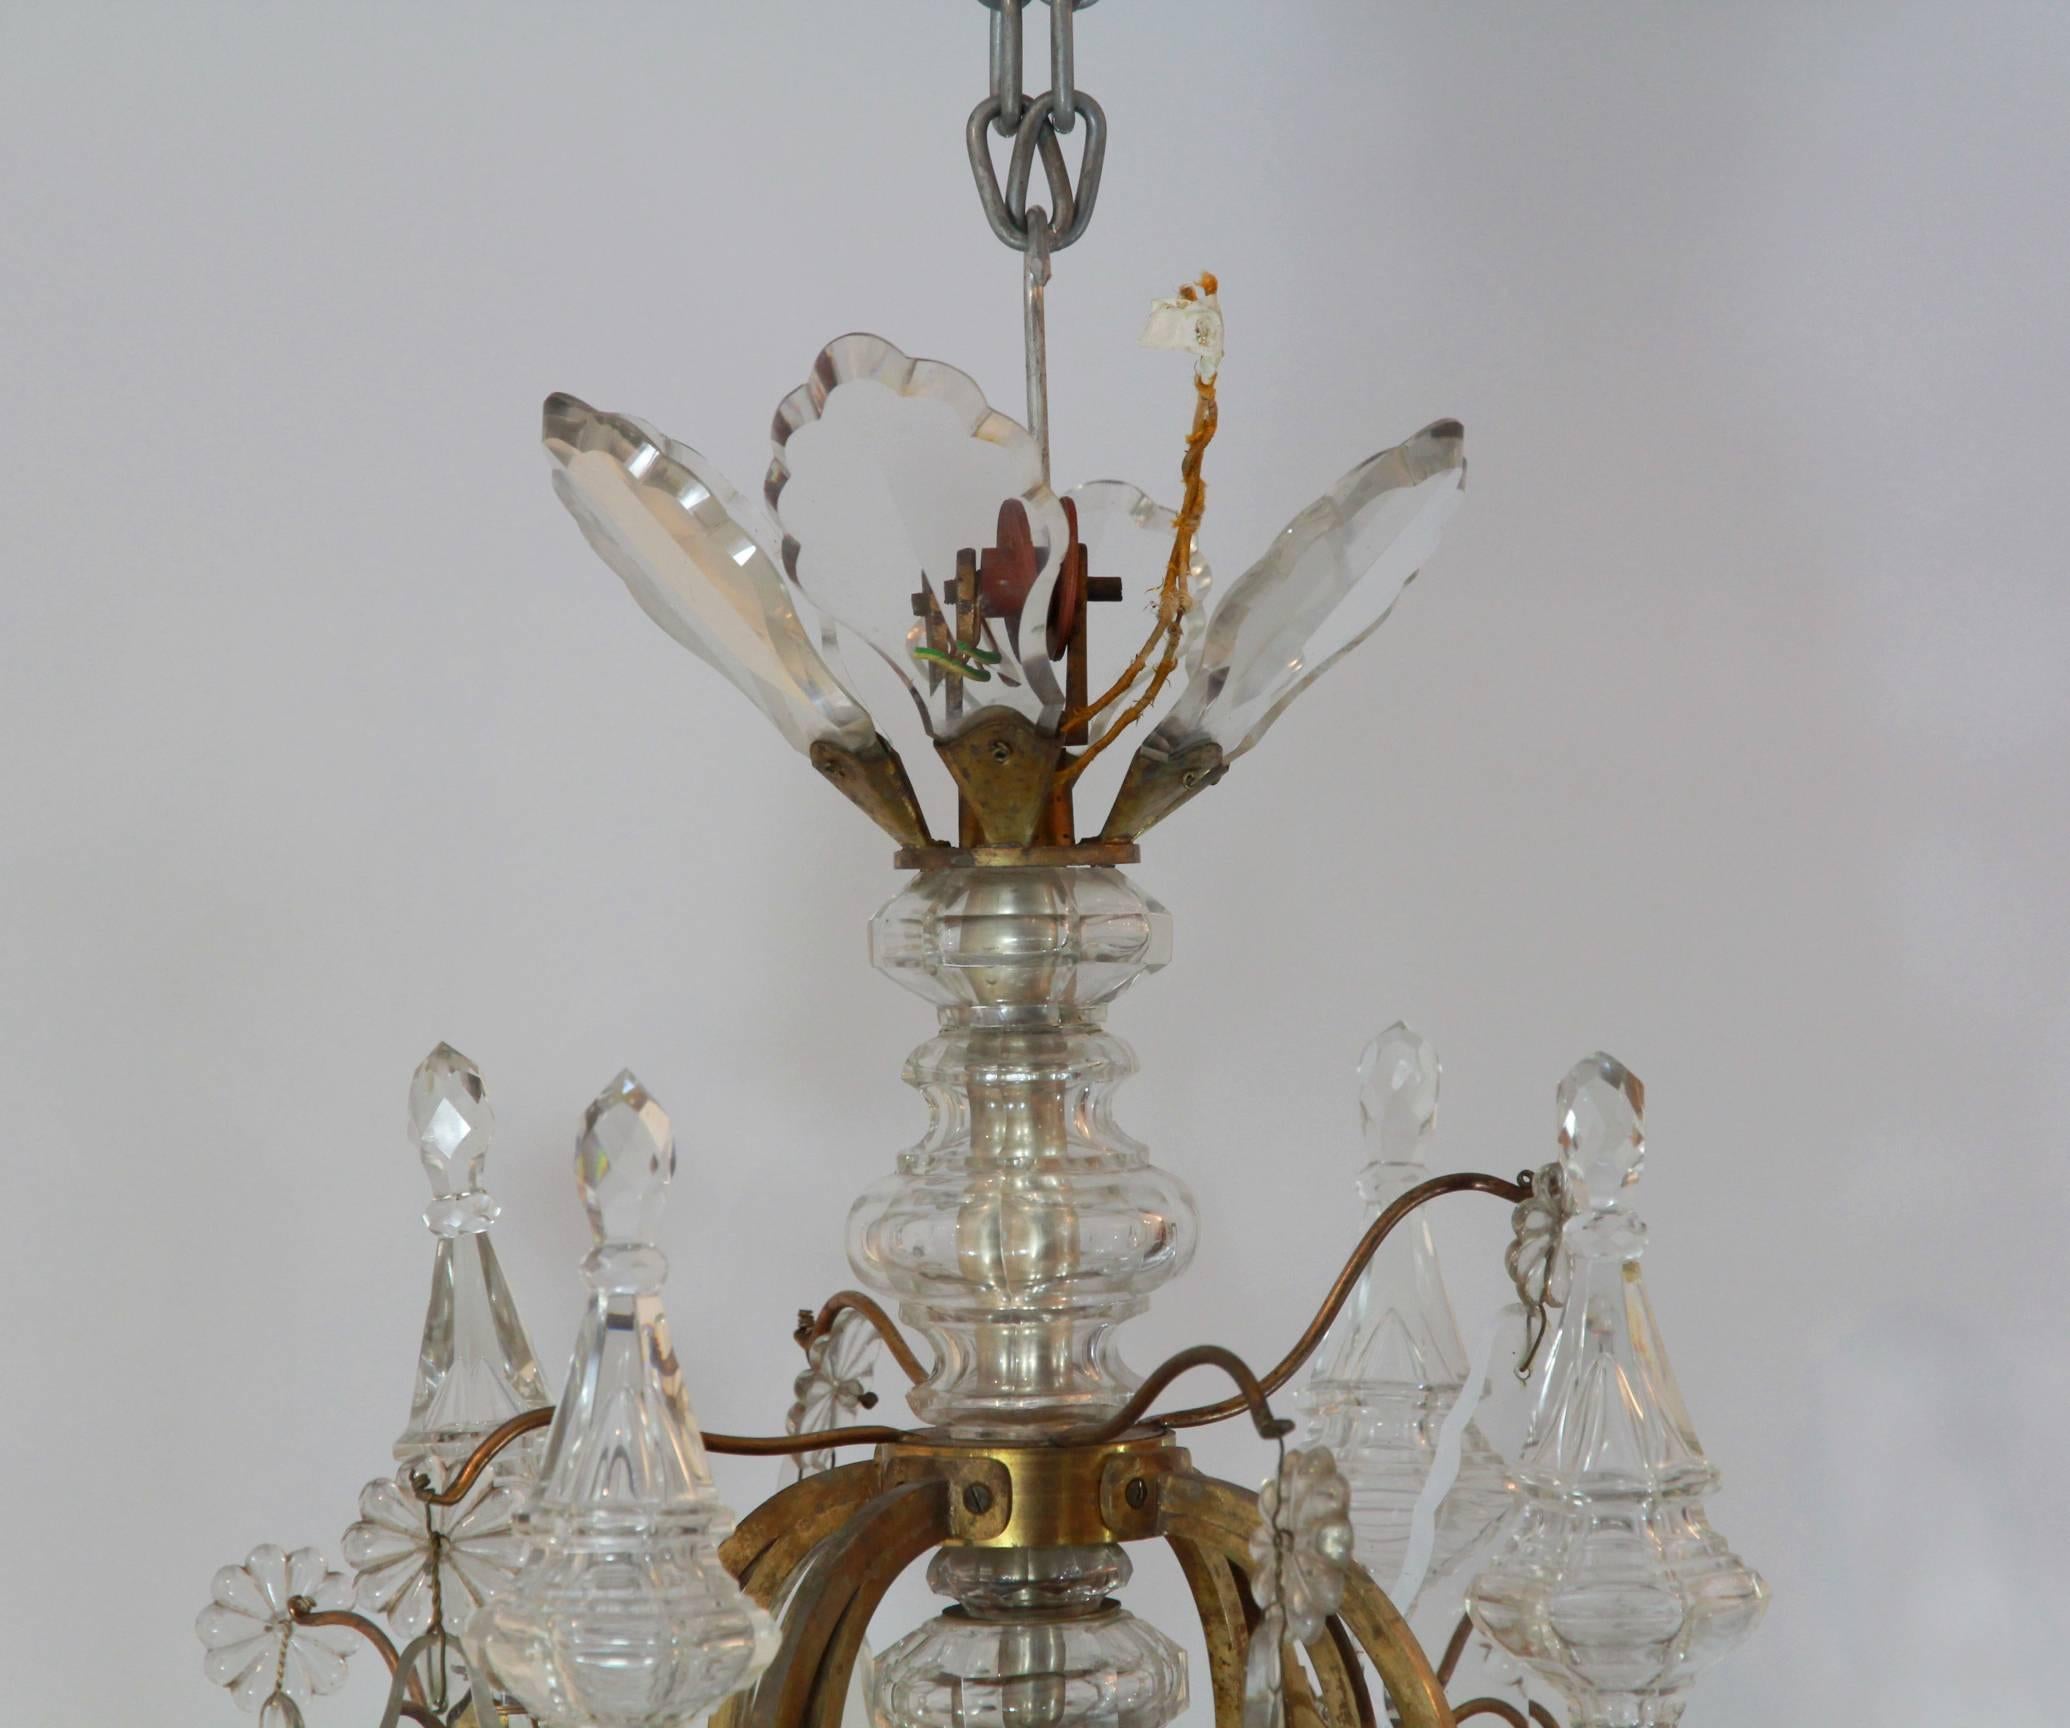 A pair of superb 19th century, French, 18th century style, cage chandeliers, of a good scale with beautifully hand cut facetted plaques suspended with small glass rosettes in the form of daisies, of varying shapes and sizes, all original. Comprised